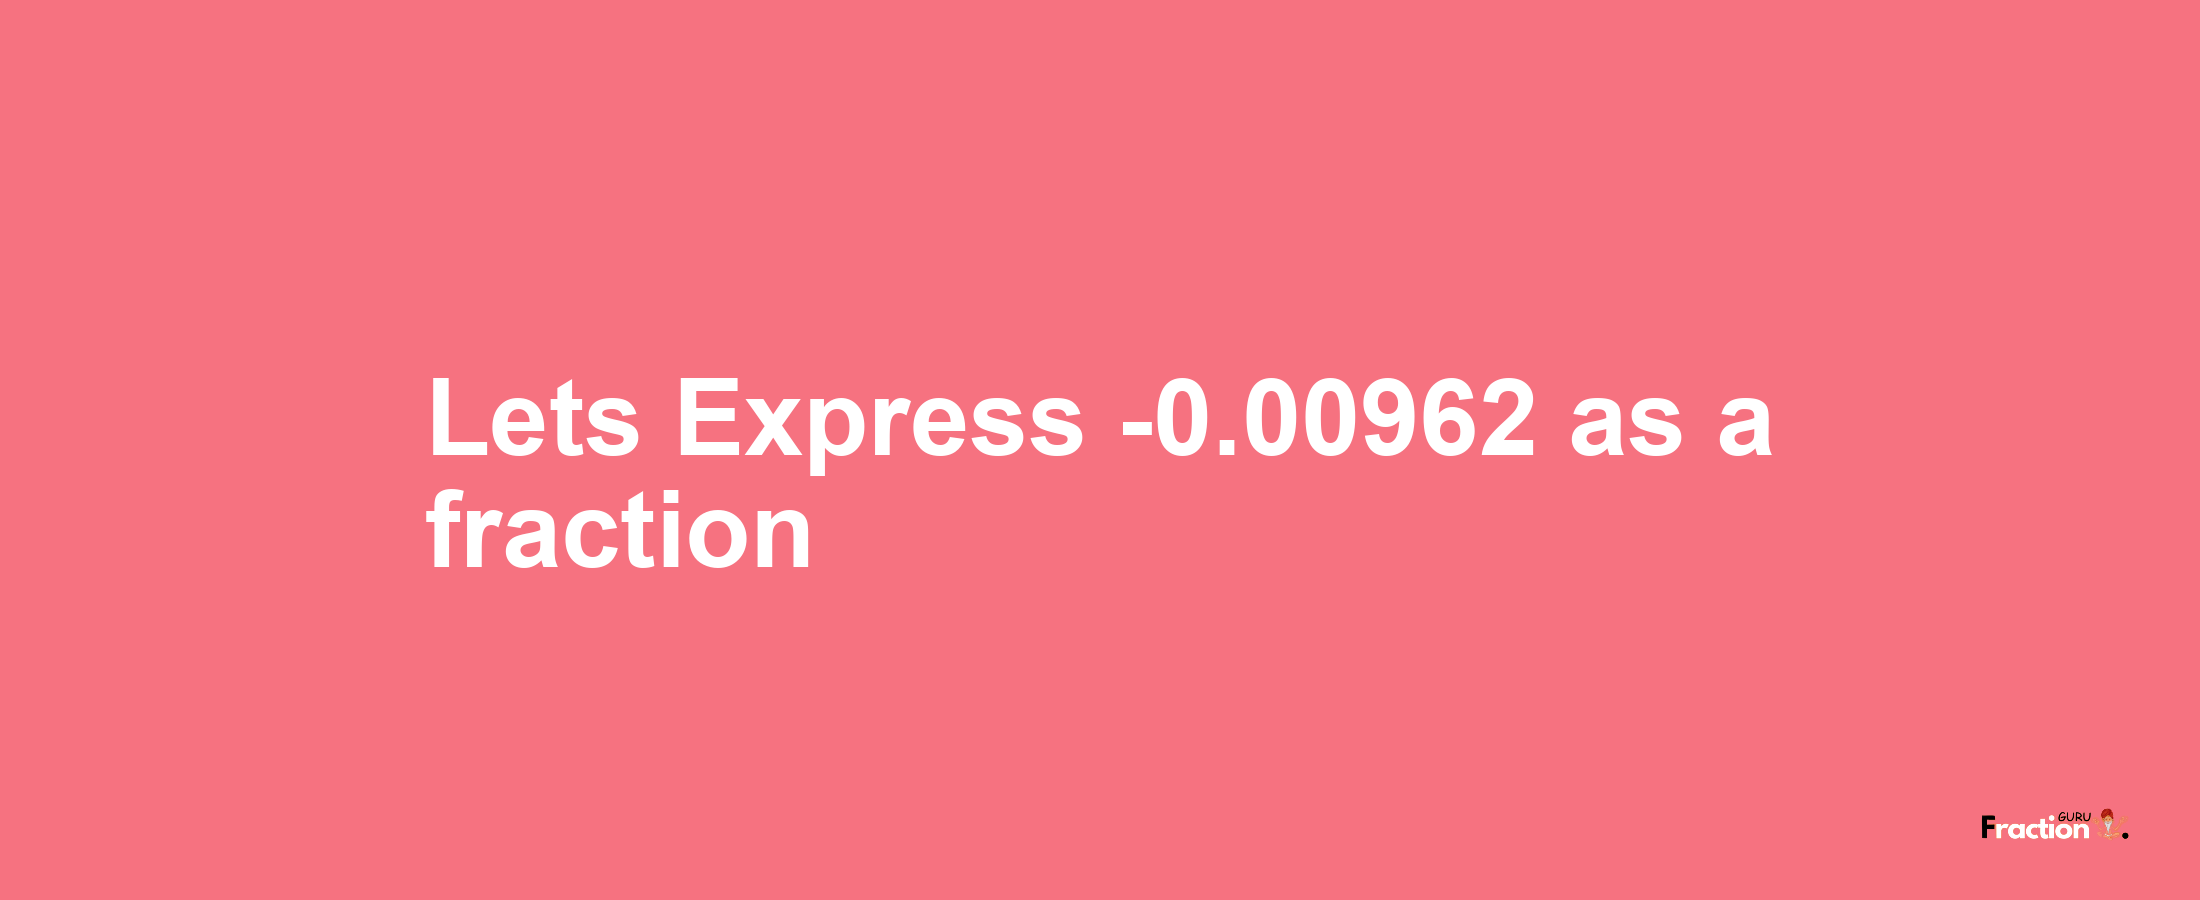 Lets Express -0.00962 as afraction